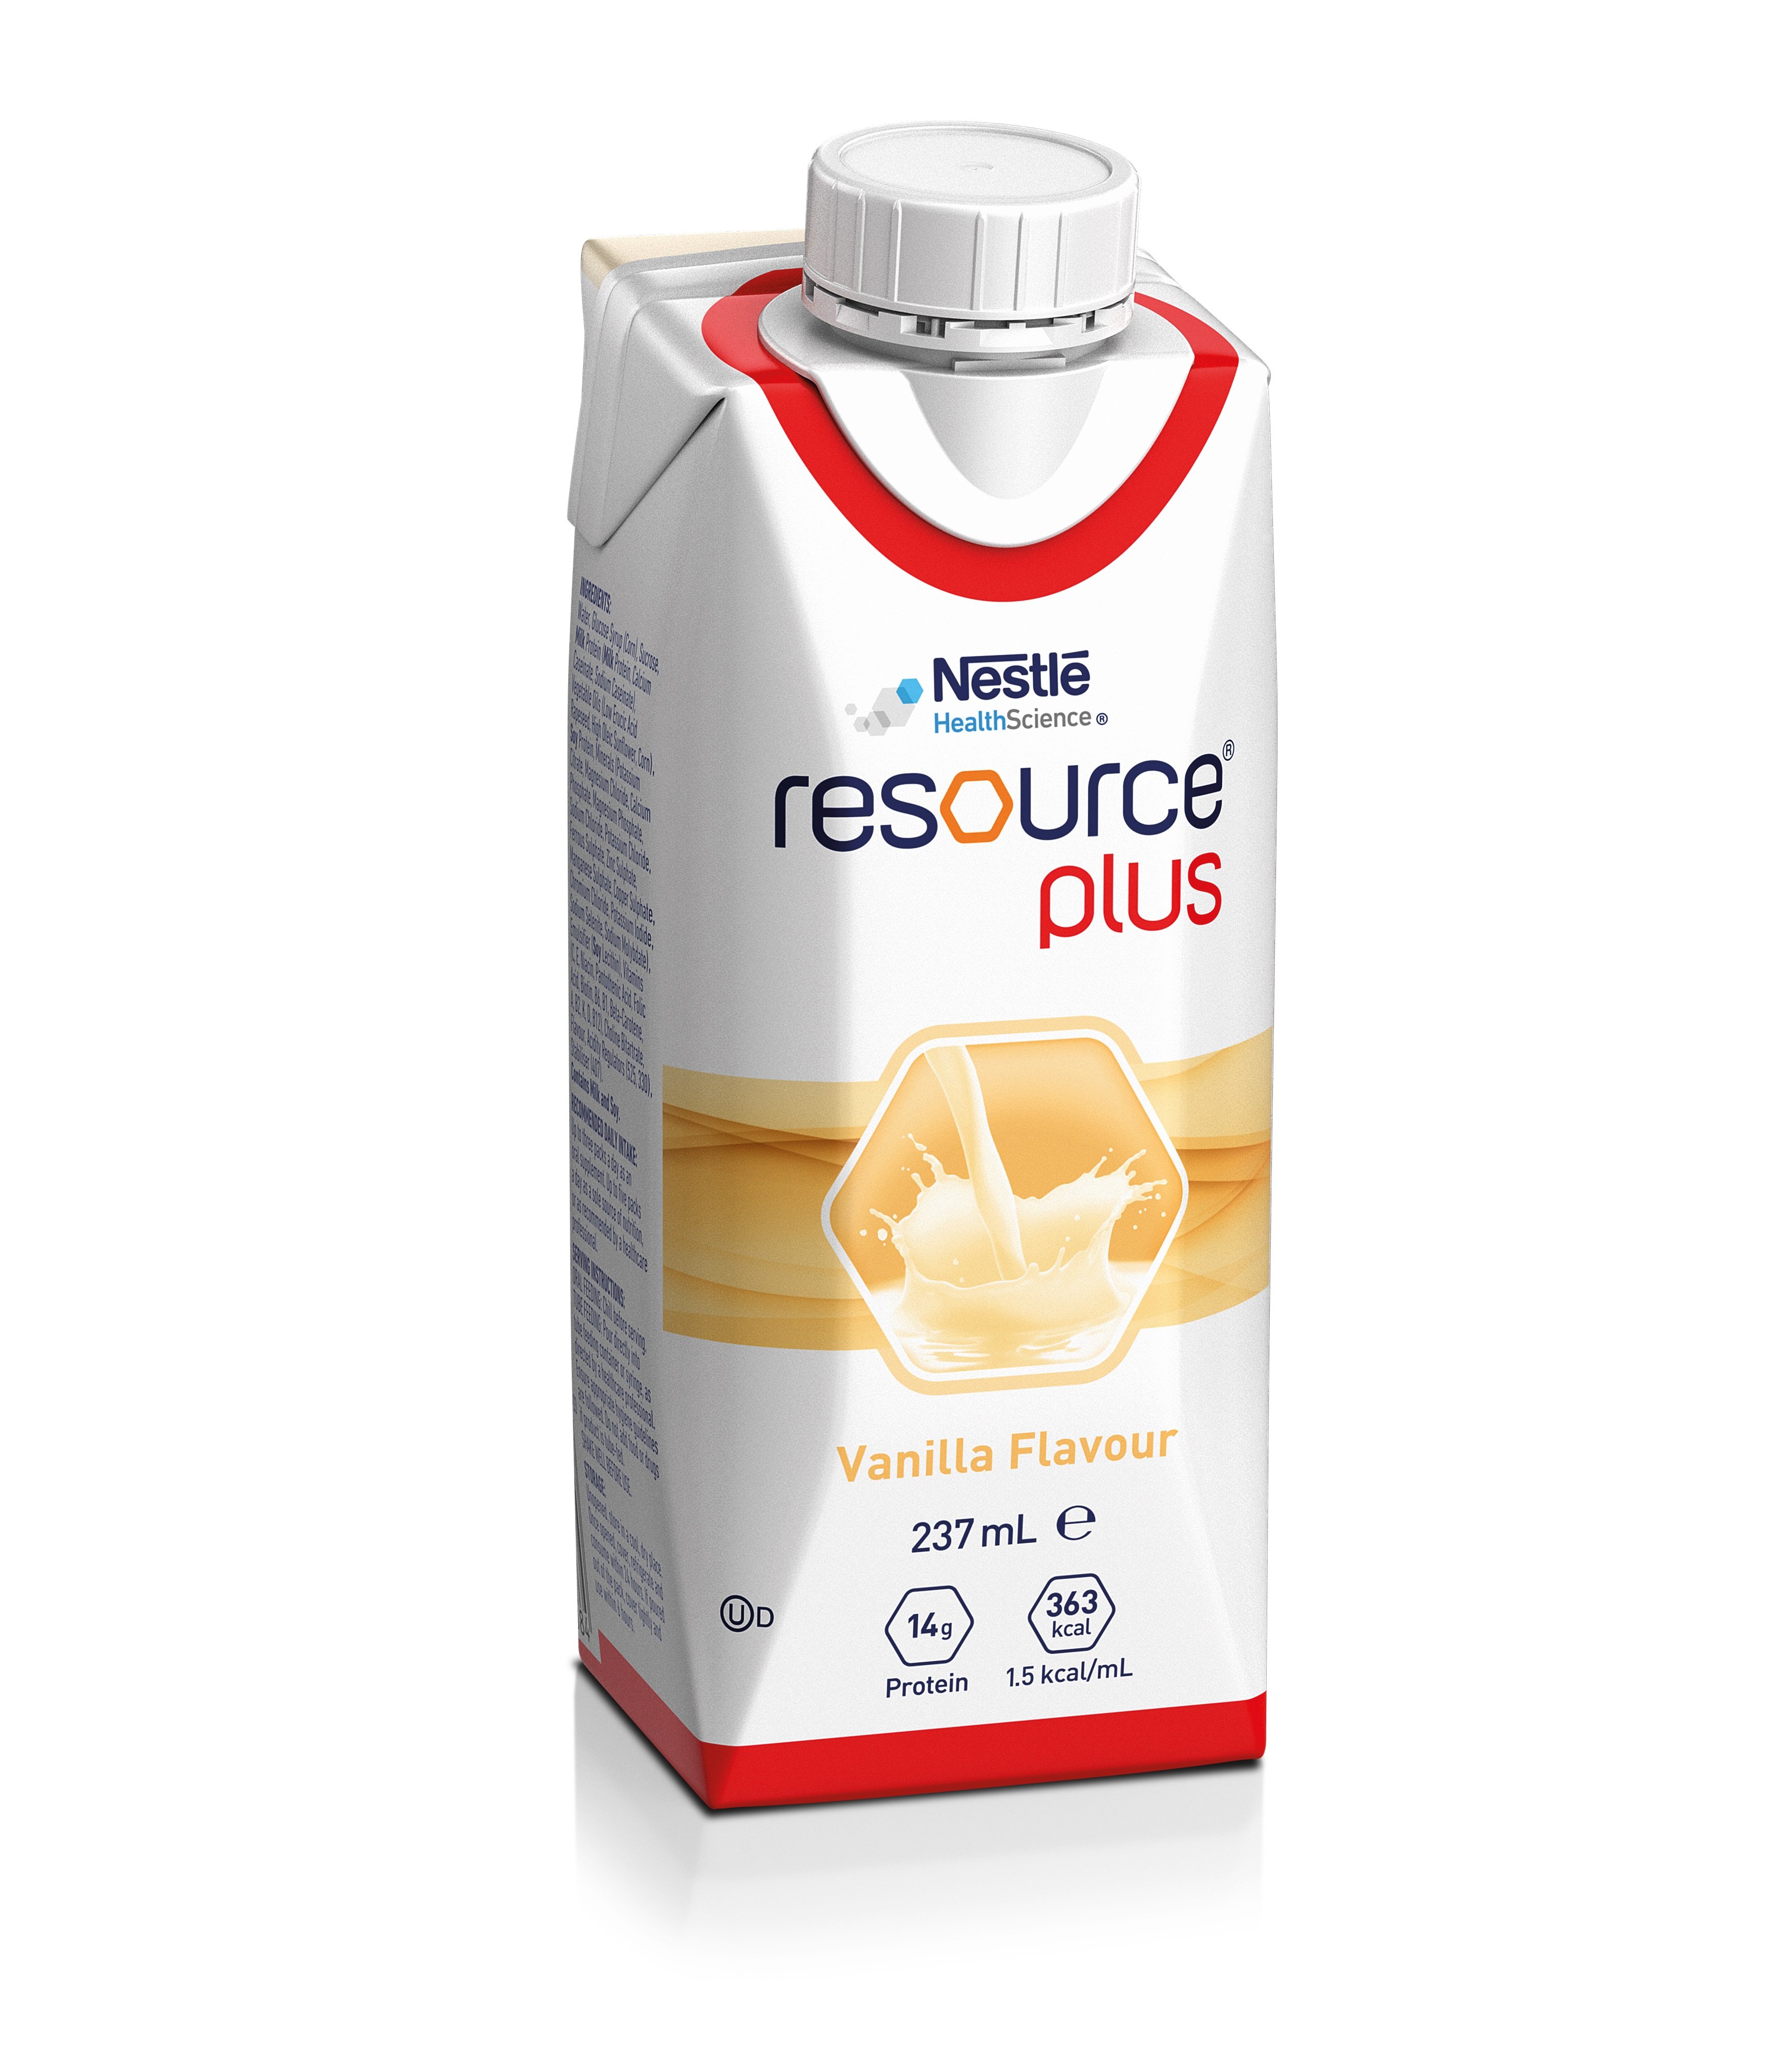 RESOURCE PLUS VANILLA 237ML BOX 24 (OUT OF STOCK DUE MARCH 2022)